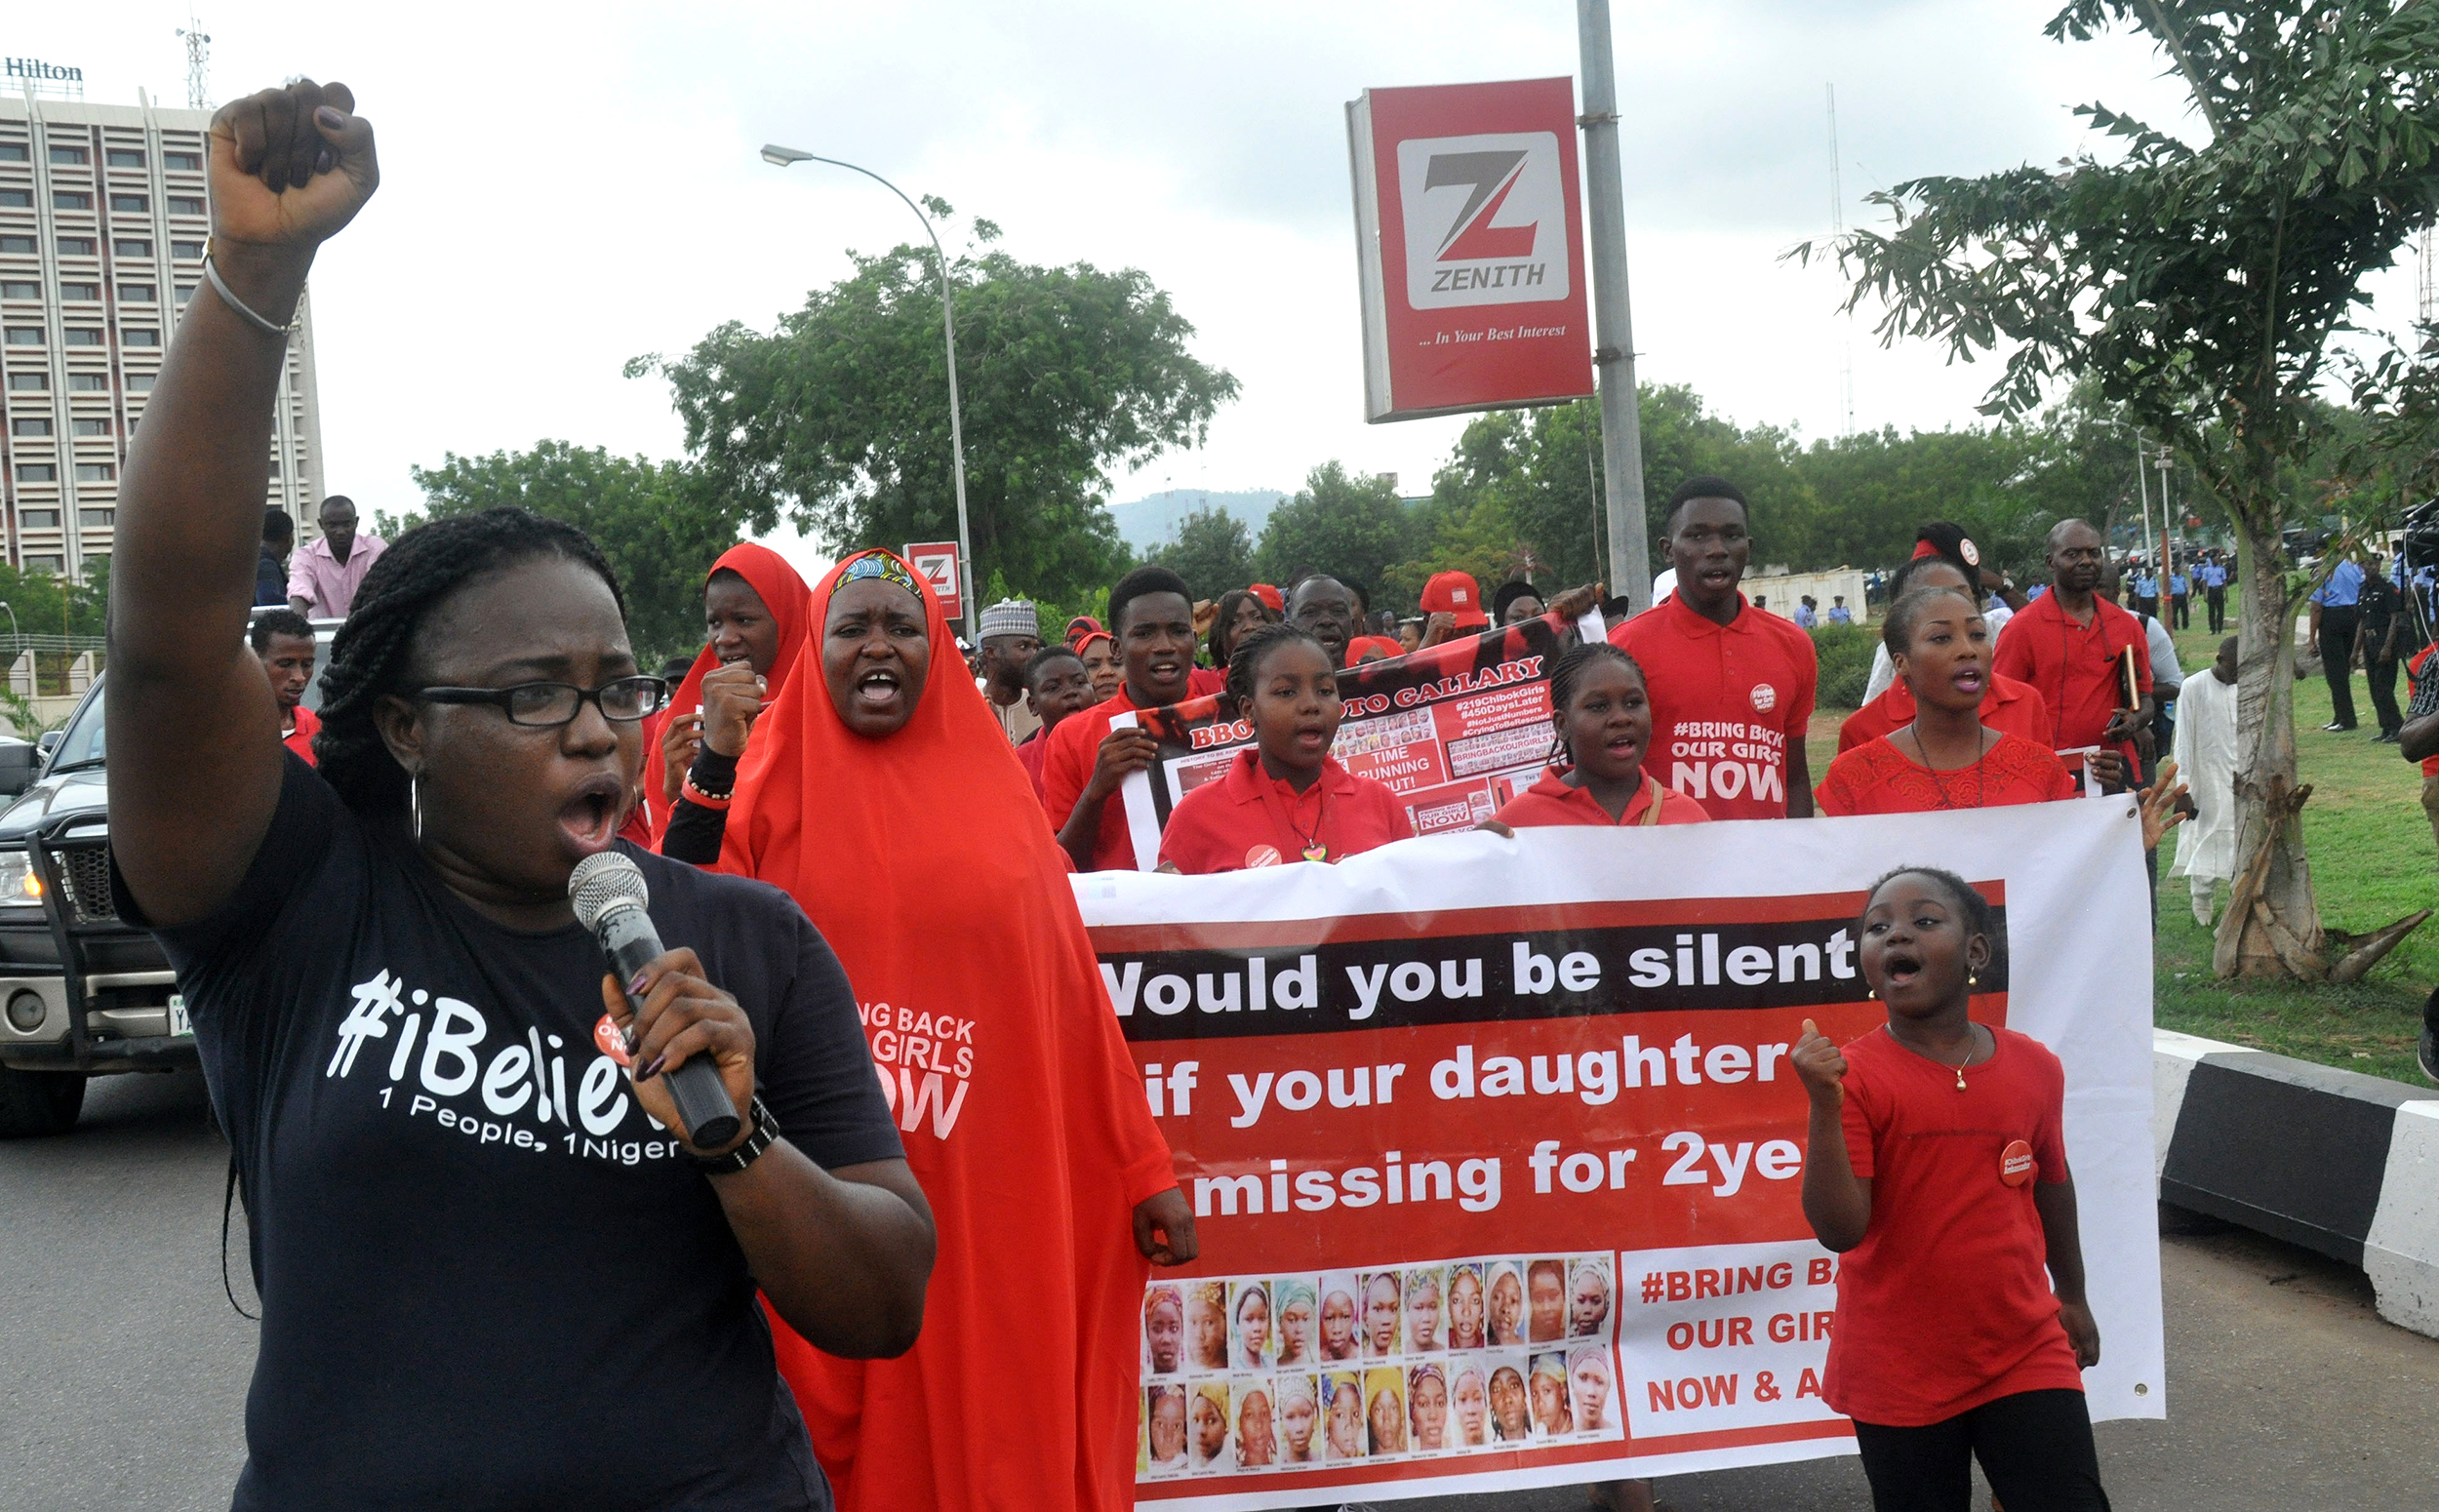 People march during a protest calling on the government to rescue the kidnapped girls of the government secondary school who were abducted two years ago, in Abuja, Nigeria on April 14, 2016. (Olamikan Gbemiga—AP)